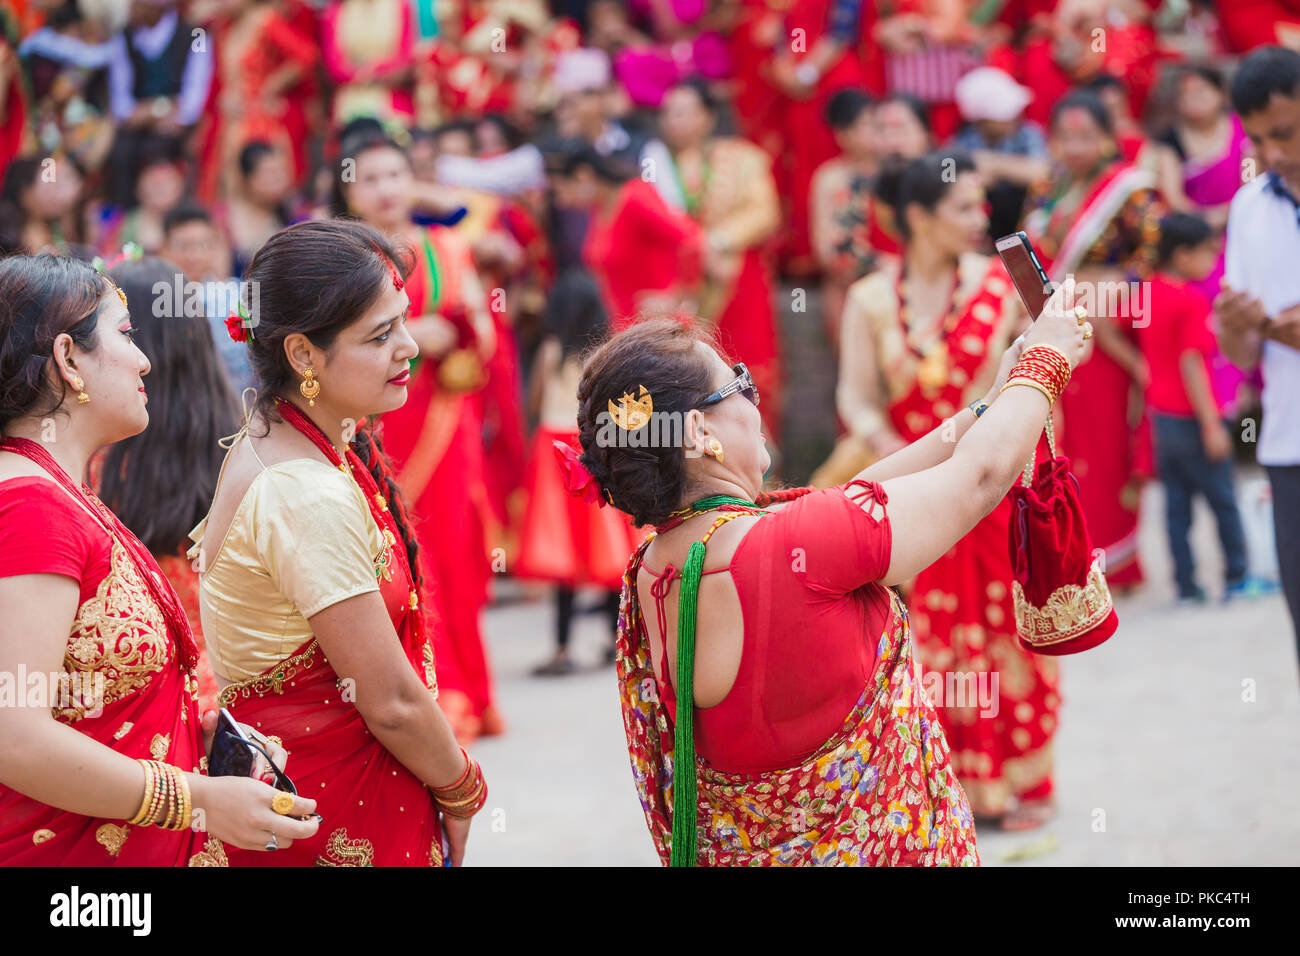 Kathmandu,Nepal - Sep 12,2018: Nepali Women take selfies with Smartphone at Teej Festival in Kathmandu.Hindu Nepali Women fast and wish for a prosperous life of their spouse and family on this festival.The festivals for women, include dancing, singing, getting together with friends,, wearing red, green or orange clothes, sharing festive foods Credit: Nabaraj Regmi/Alamy Live News Stock Photo